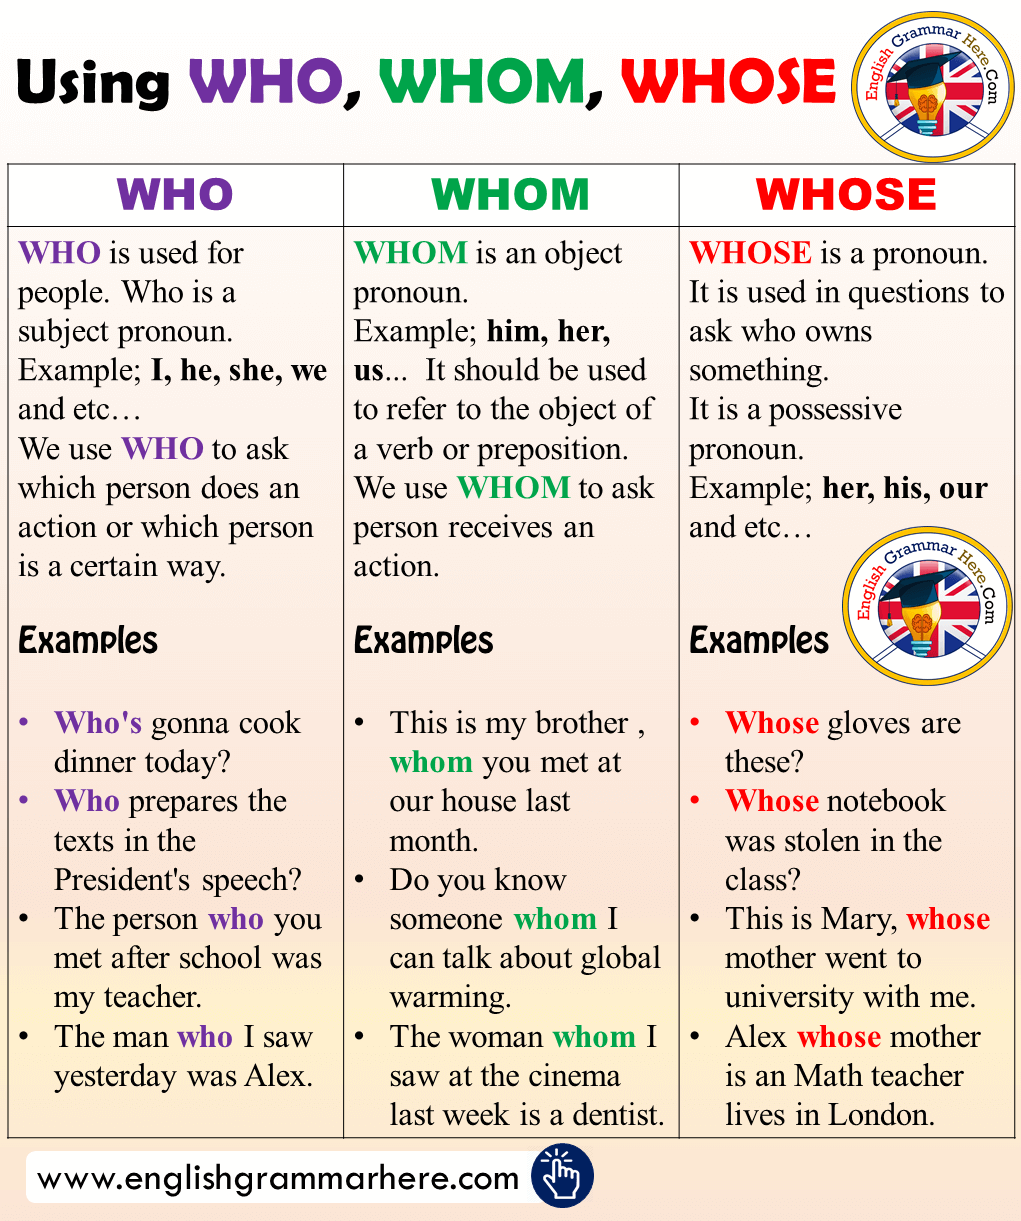 Using WHO, WHOM, WHOSE and Example Sentences in English